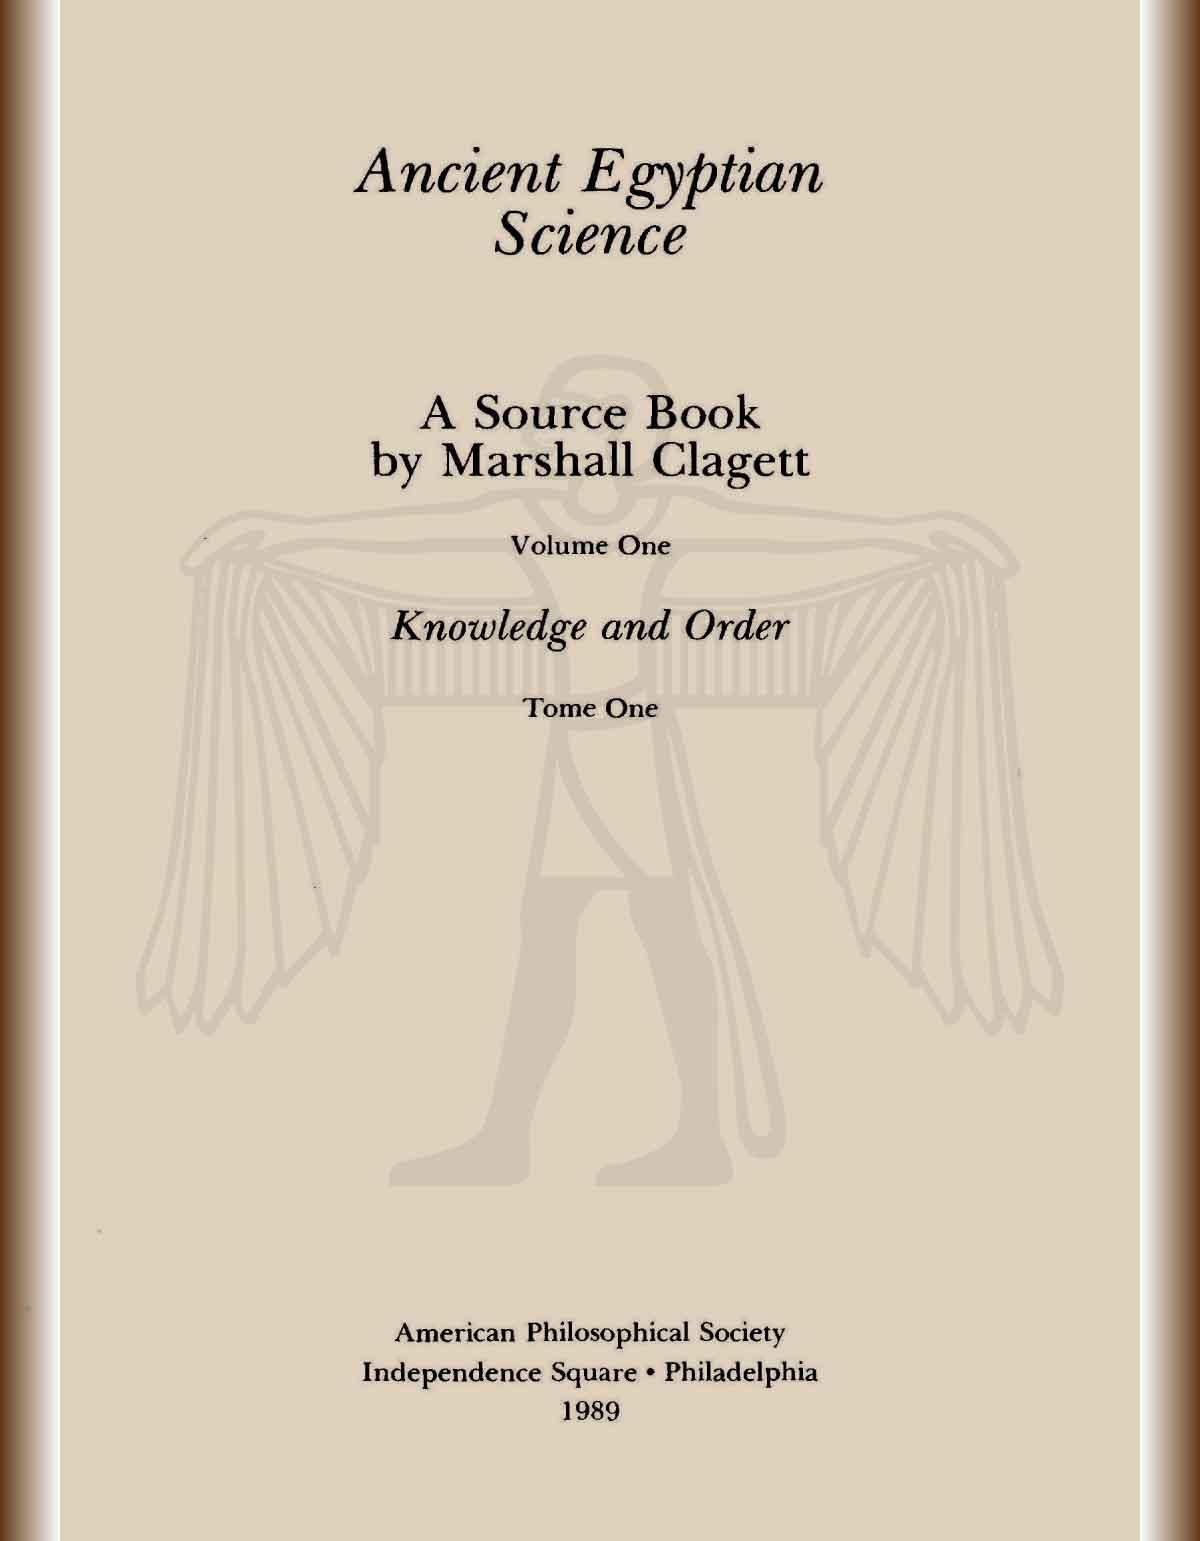 Ancient-Egyptian-Science-a-Source-Book-Volume-1-Knowledge-and-Order-Tome-One-cover